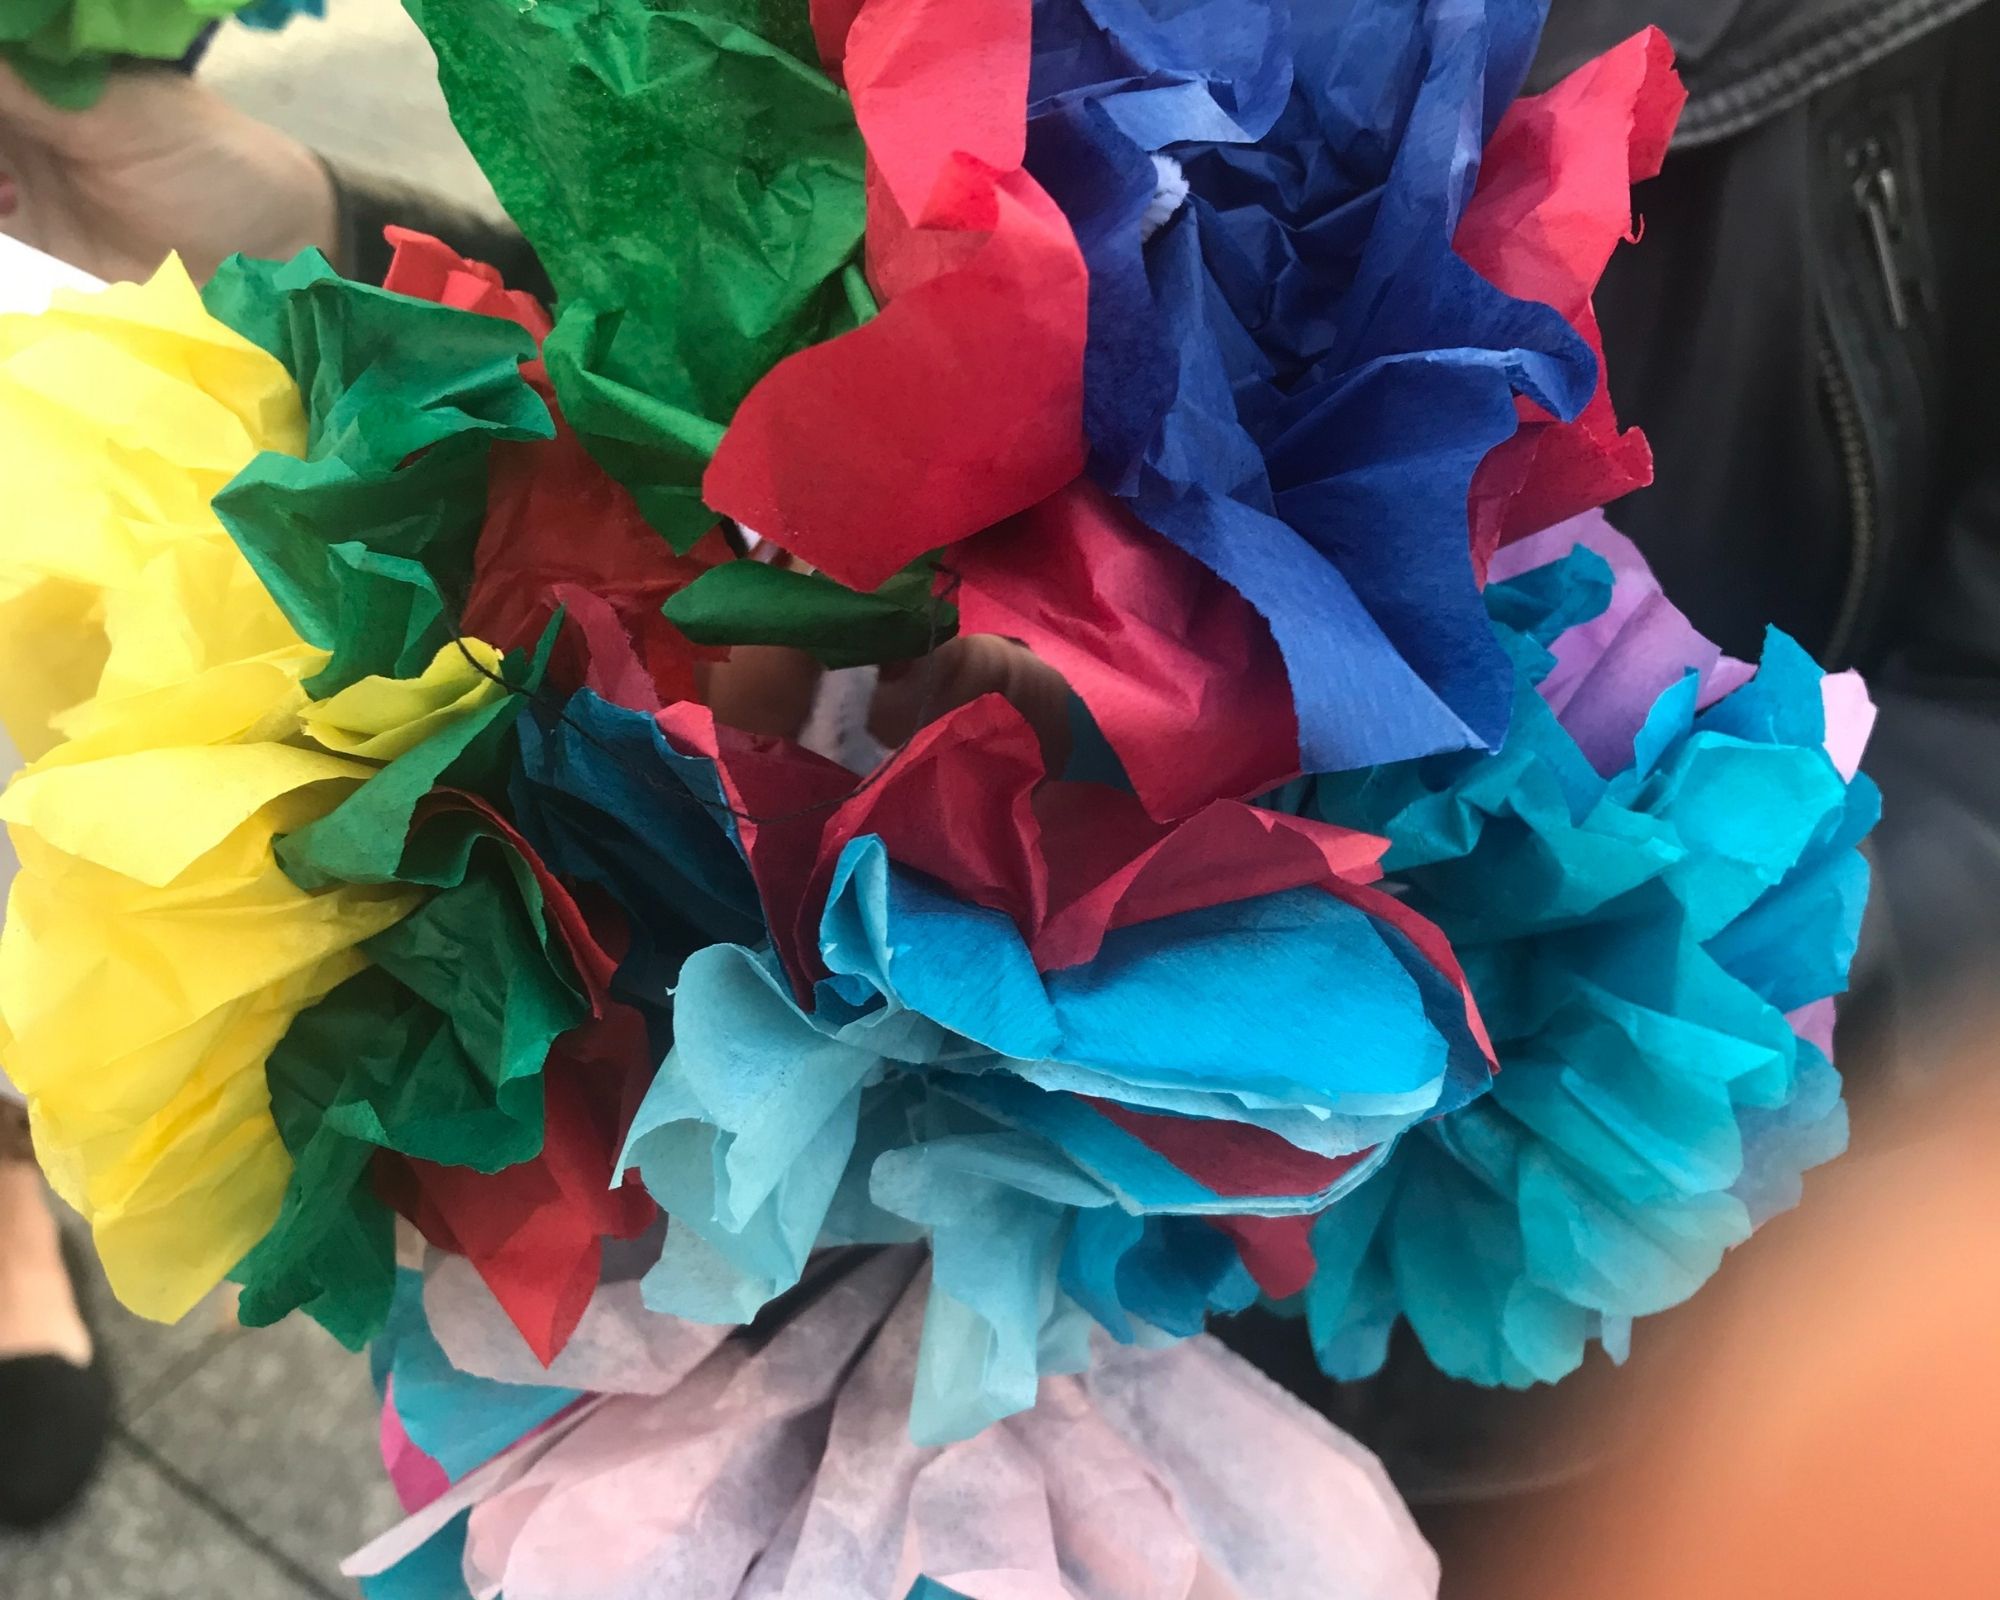 Multi-colored bouquet of tissue paper flowers